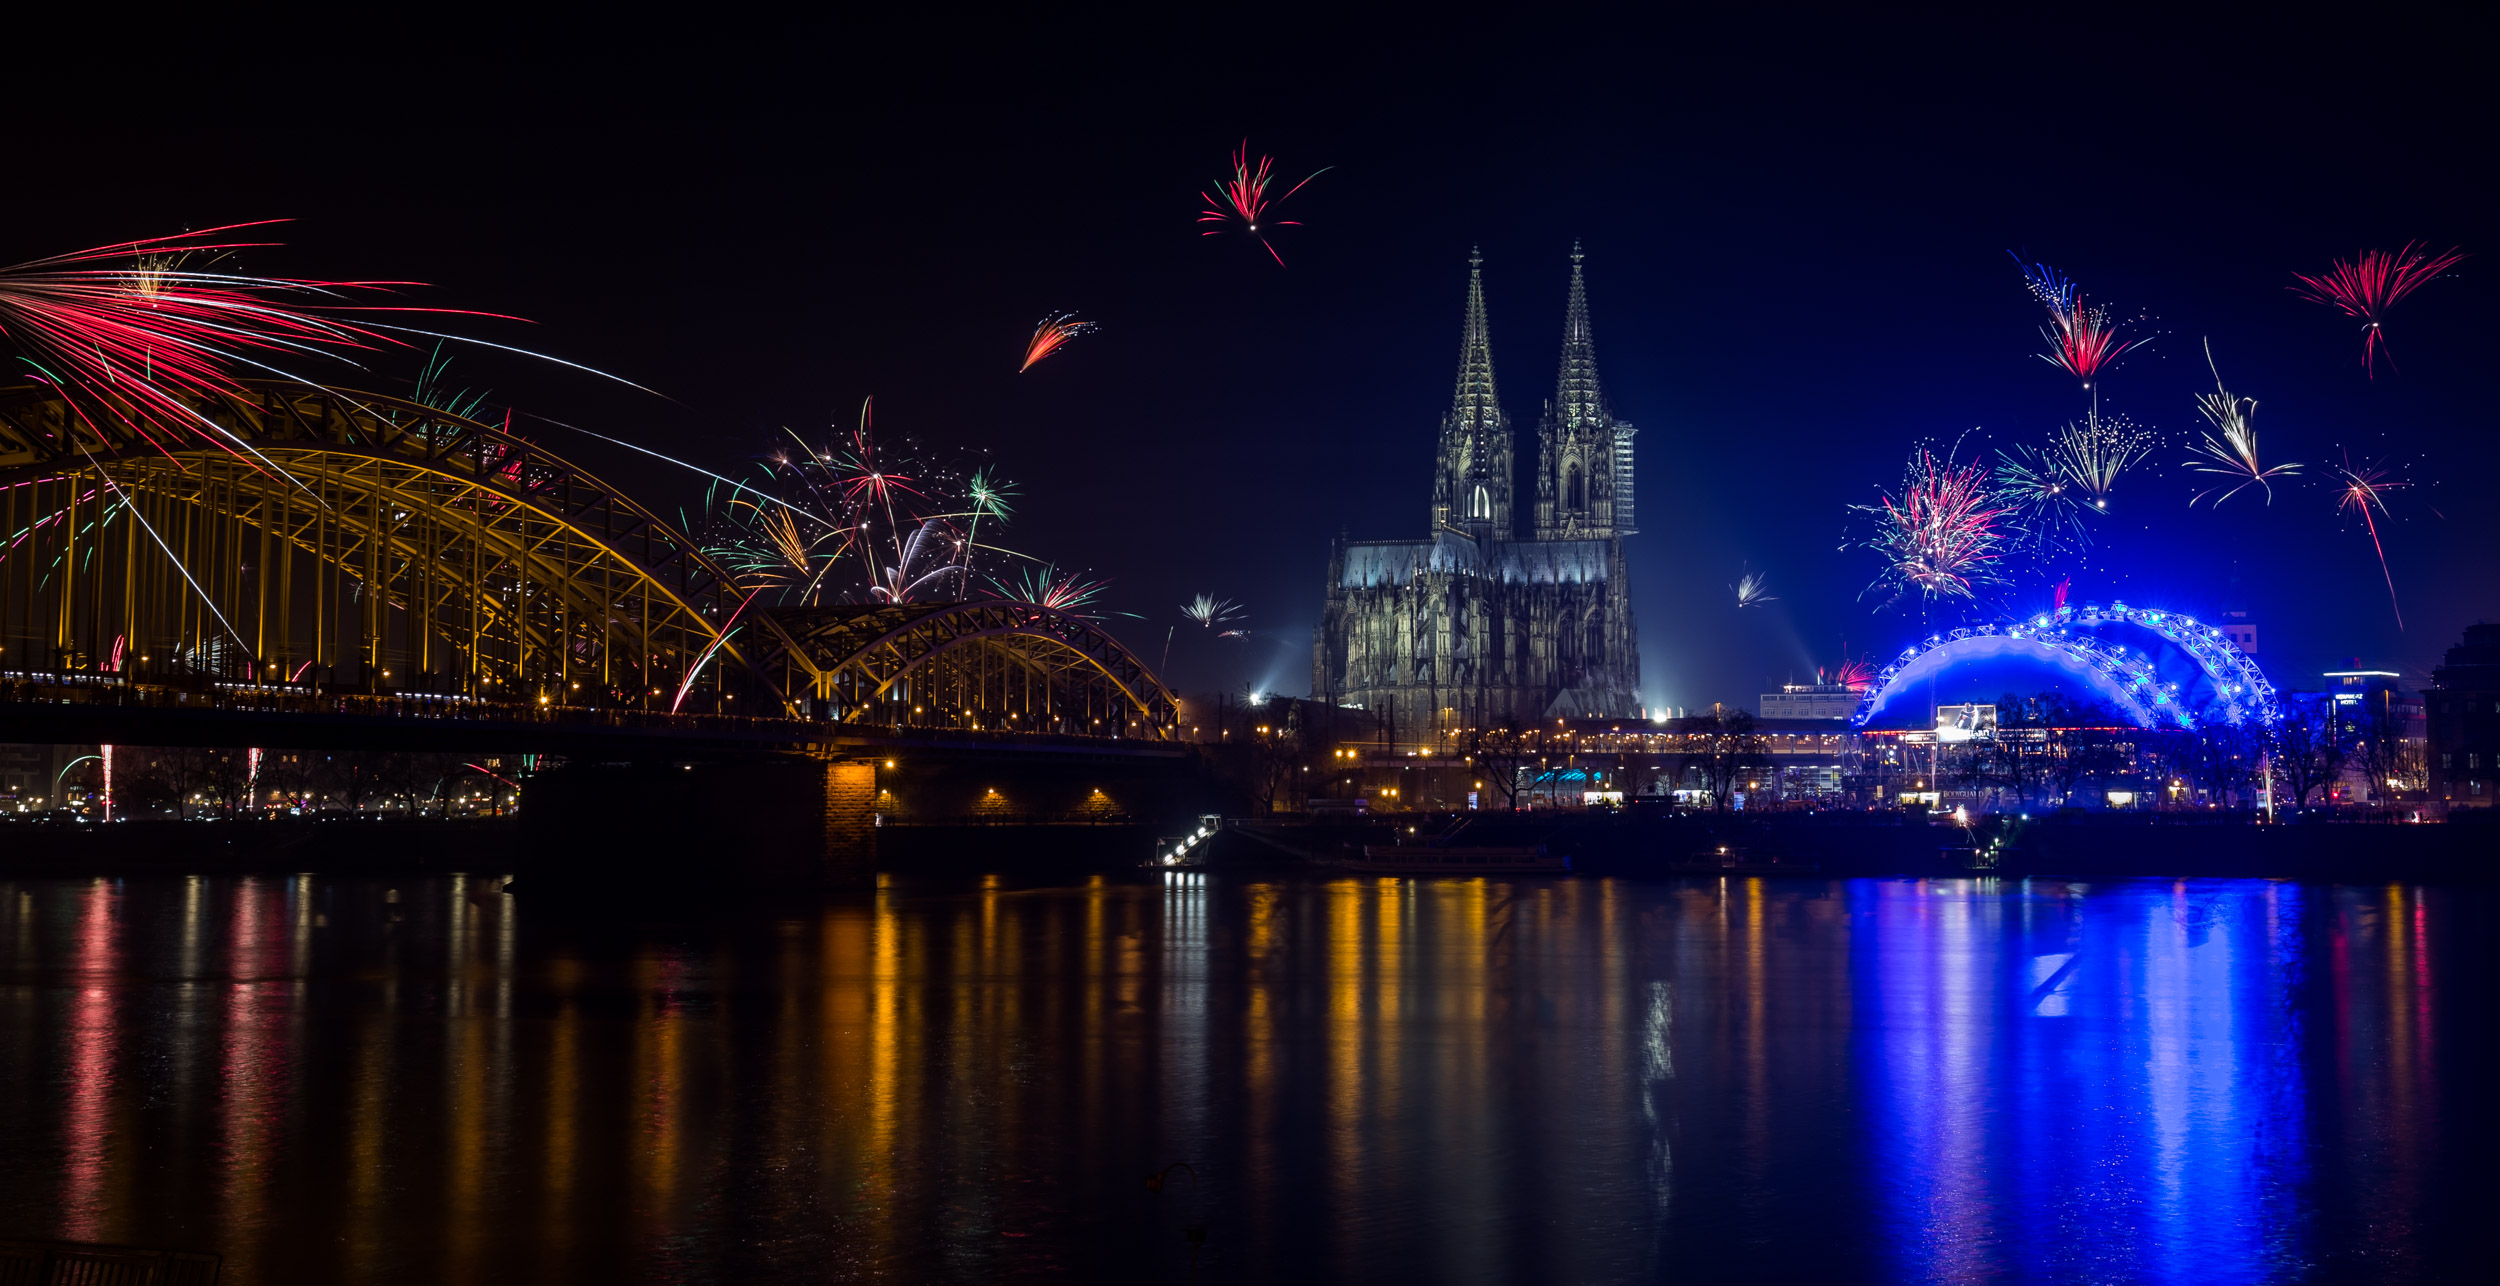 Fireworks at Cologne, Germany.